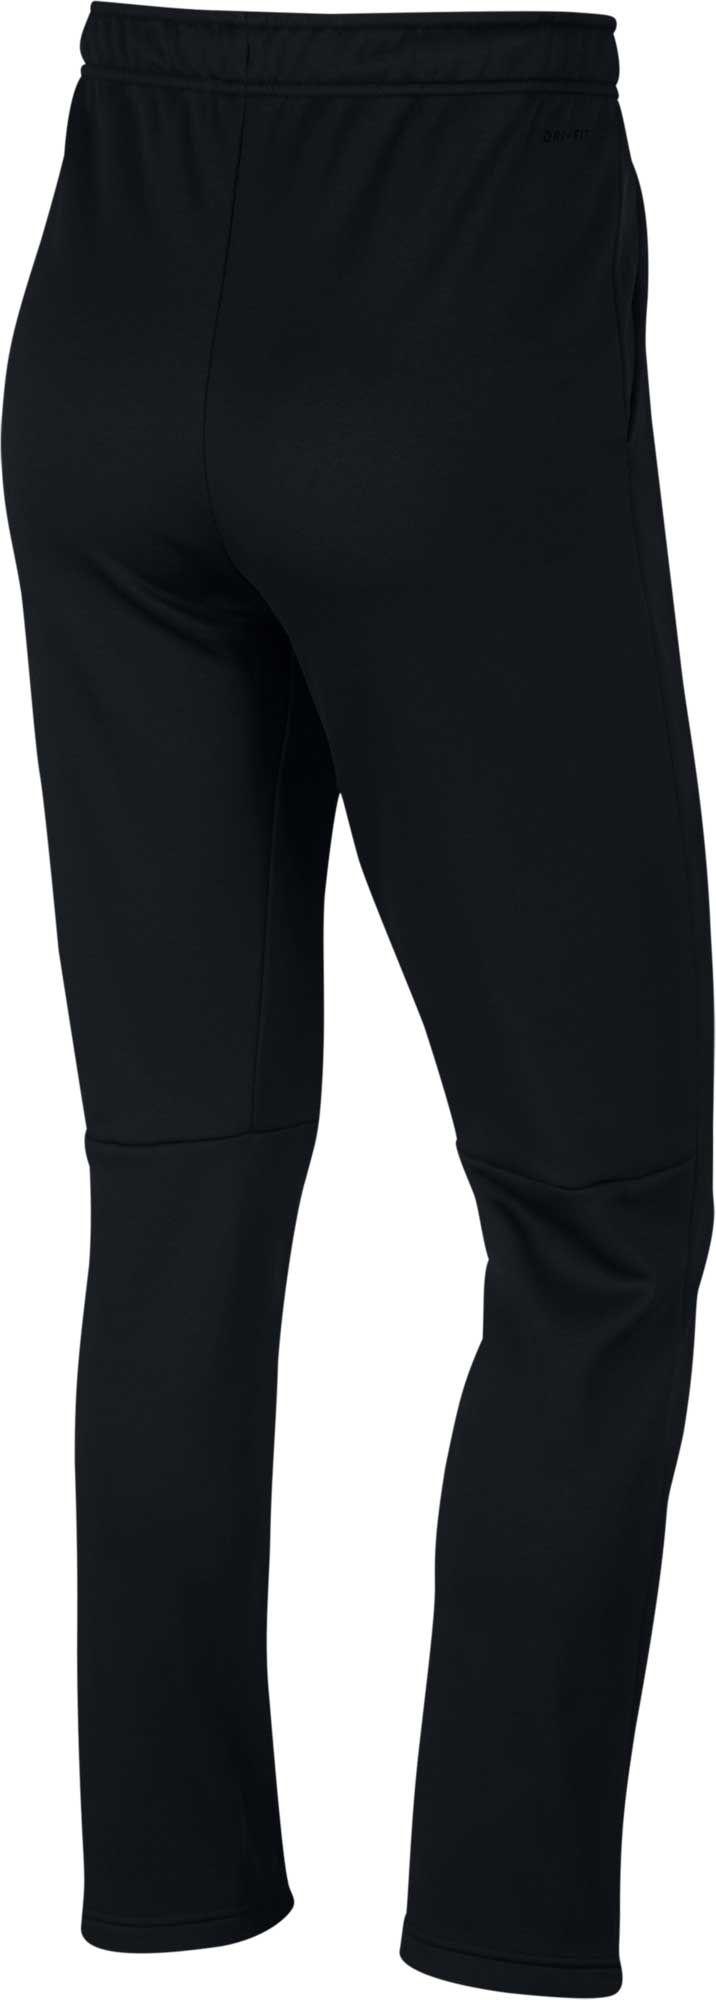 Nike Synthetic Therma Training Pants in Black for Men - Lyst